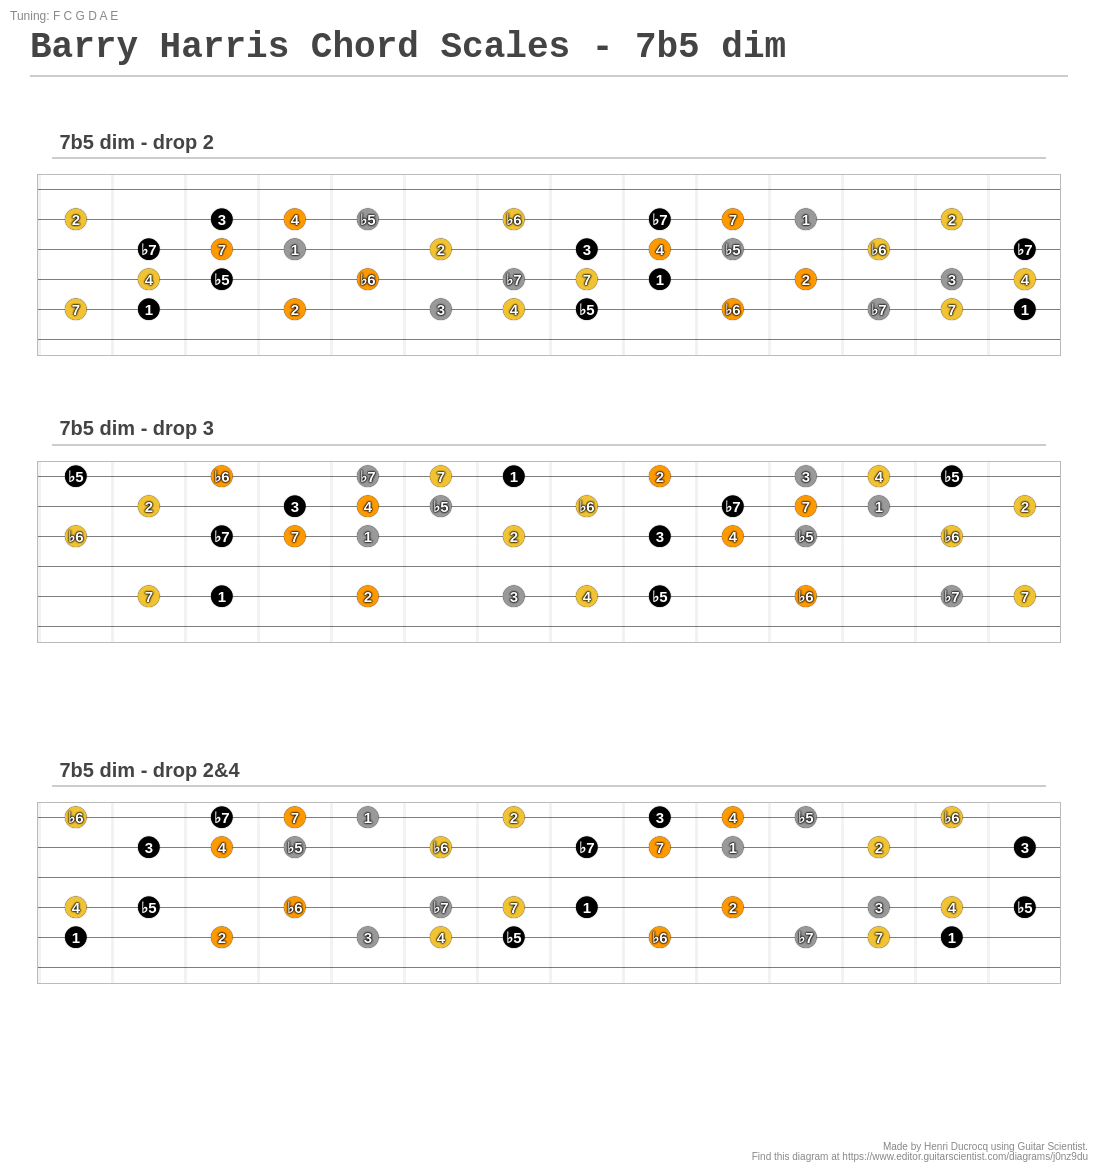 Barry harris method applied to chord progressions